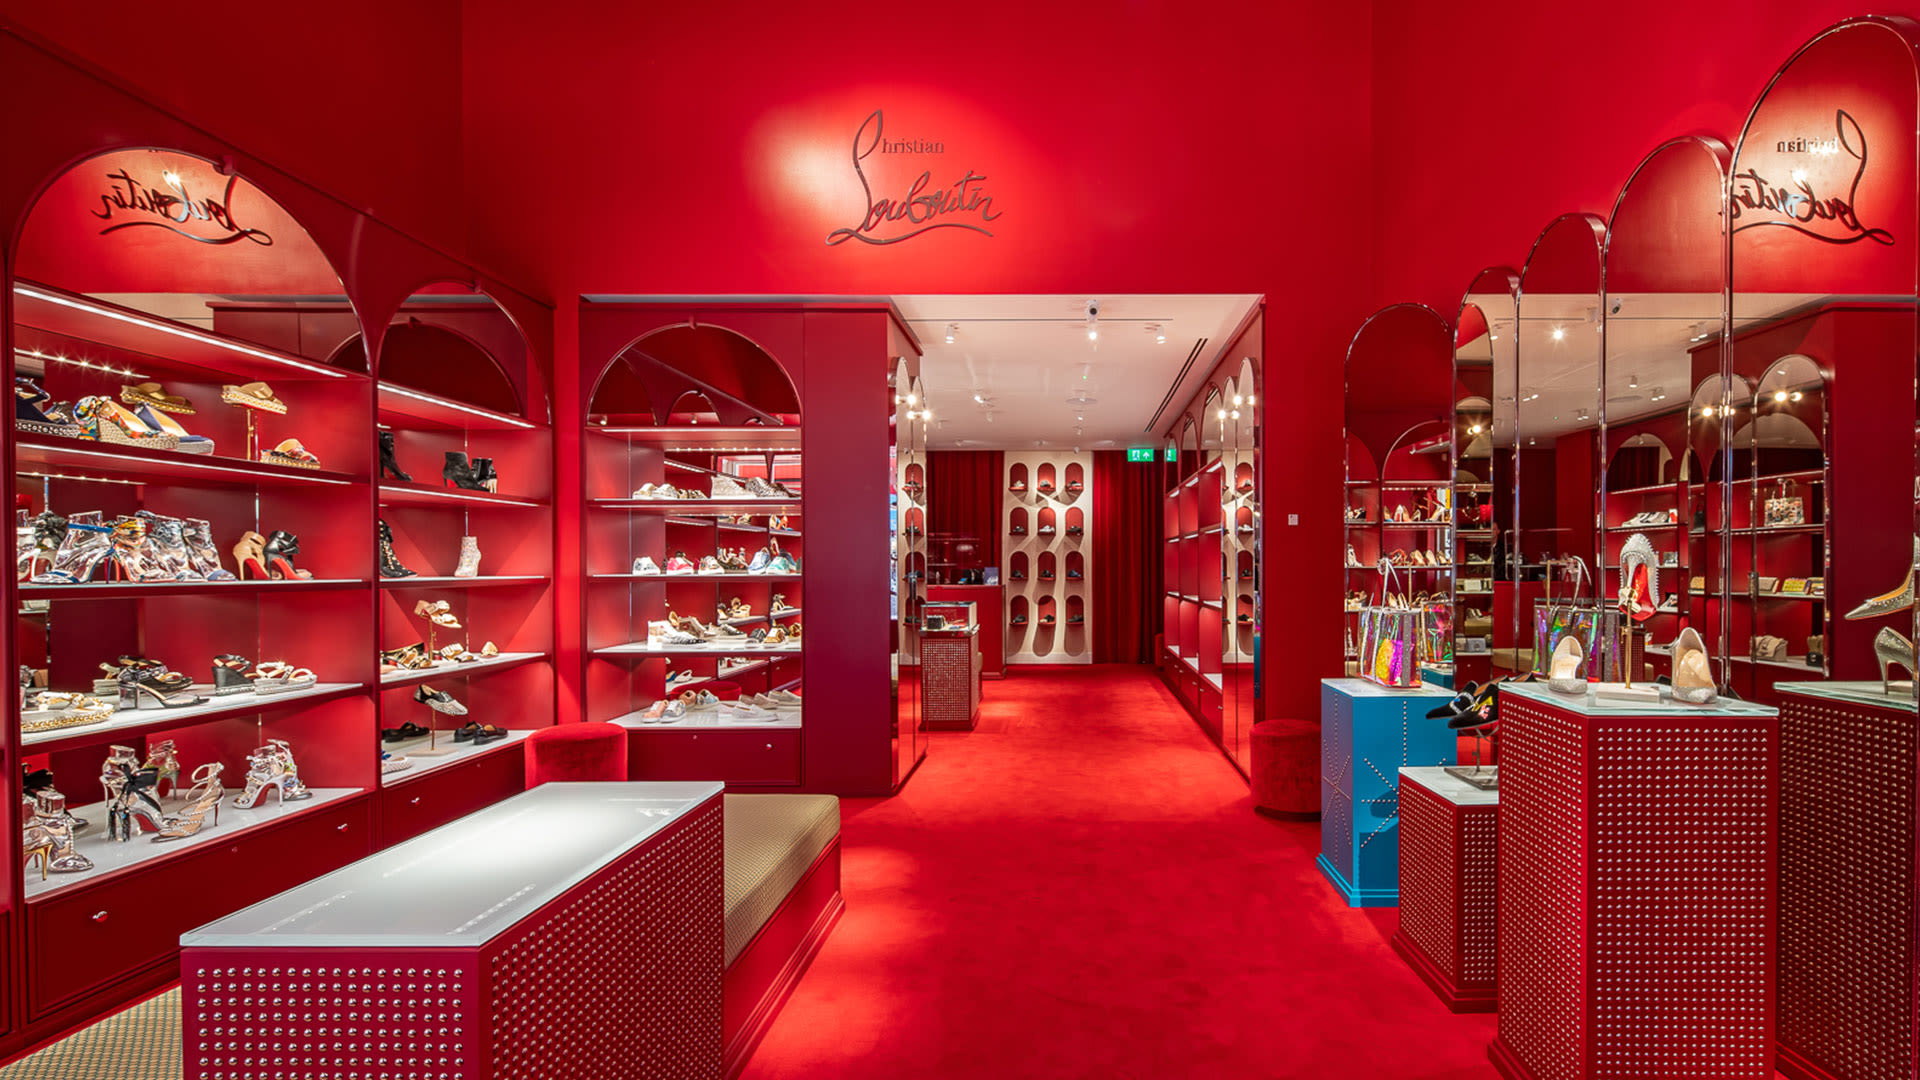 Sale Now On At Christian Louboutin Outlet Boutique UK Village